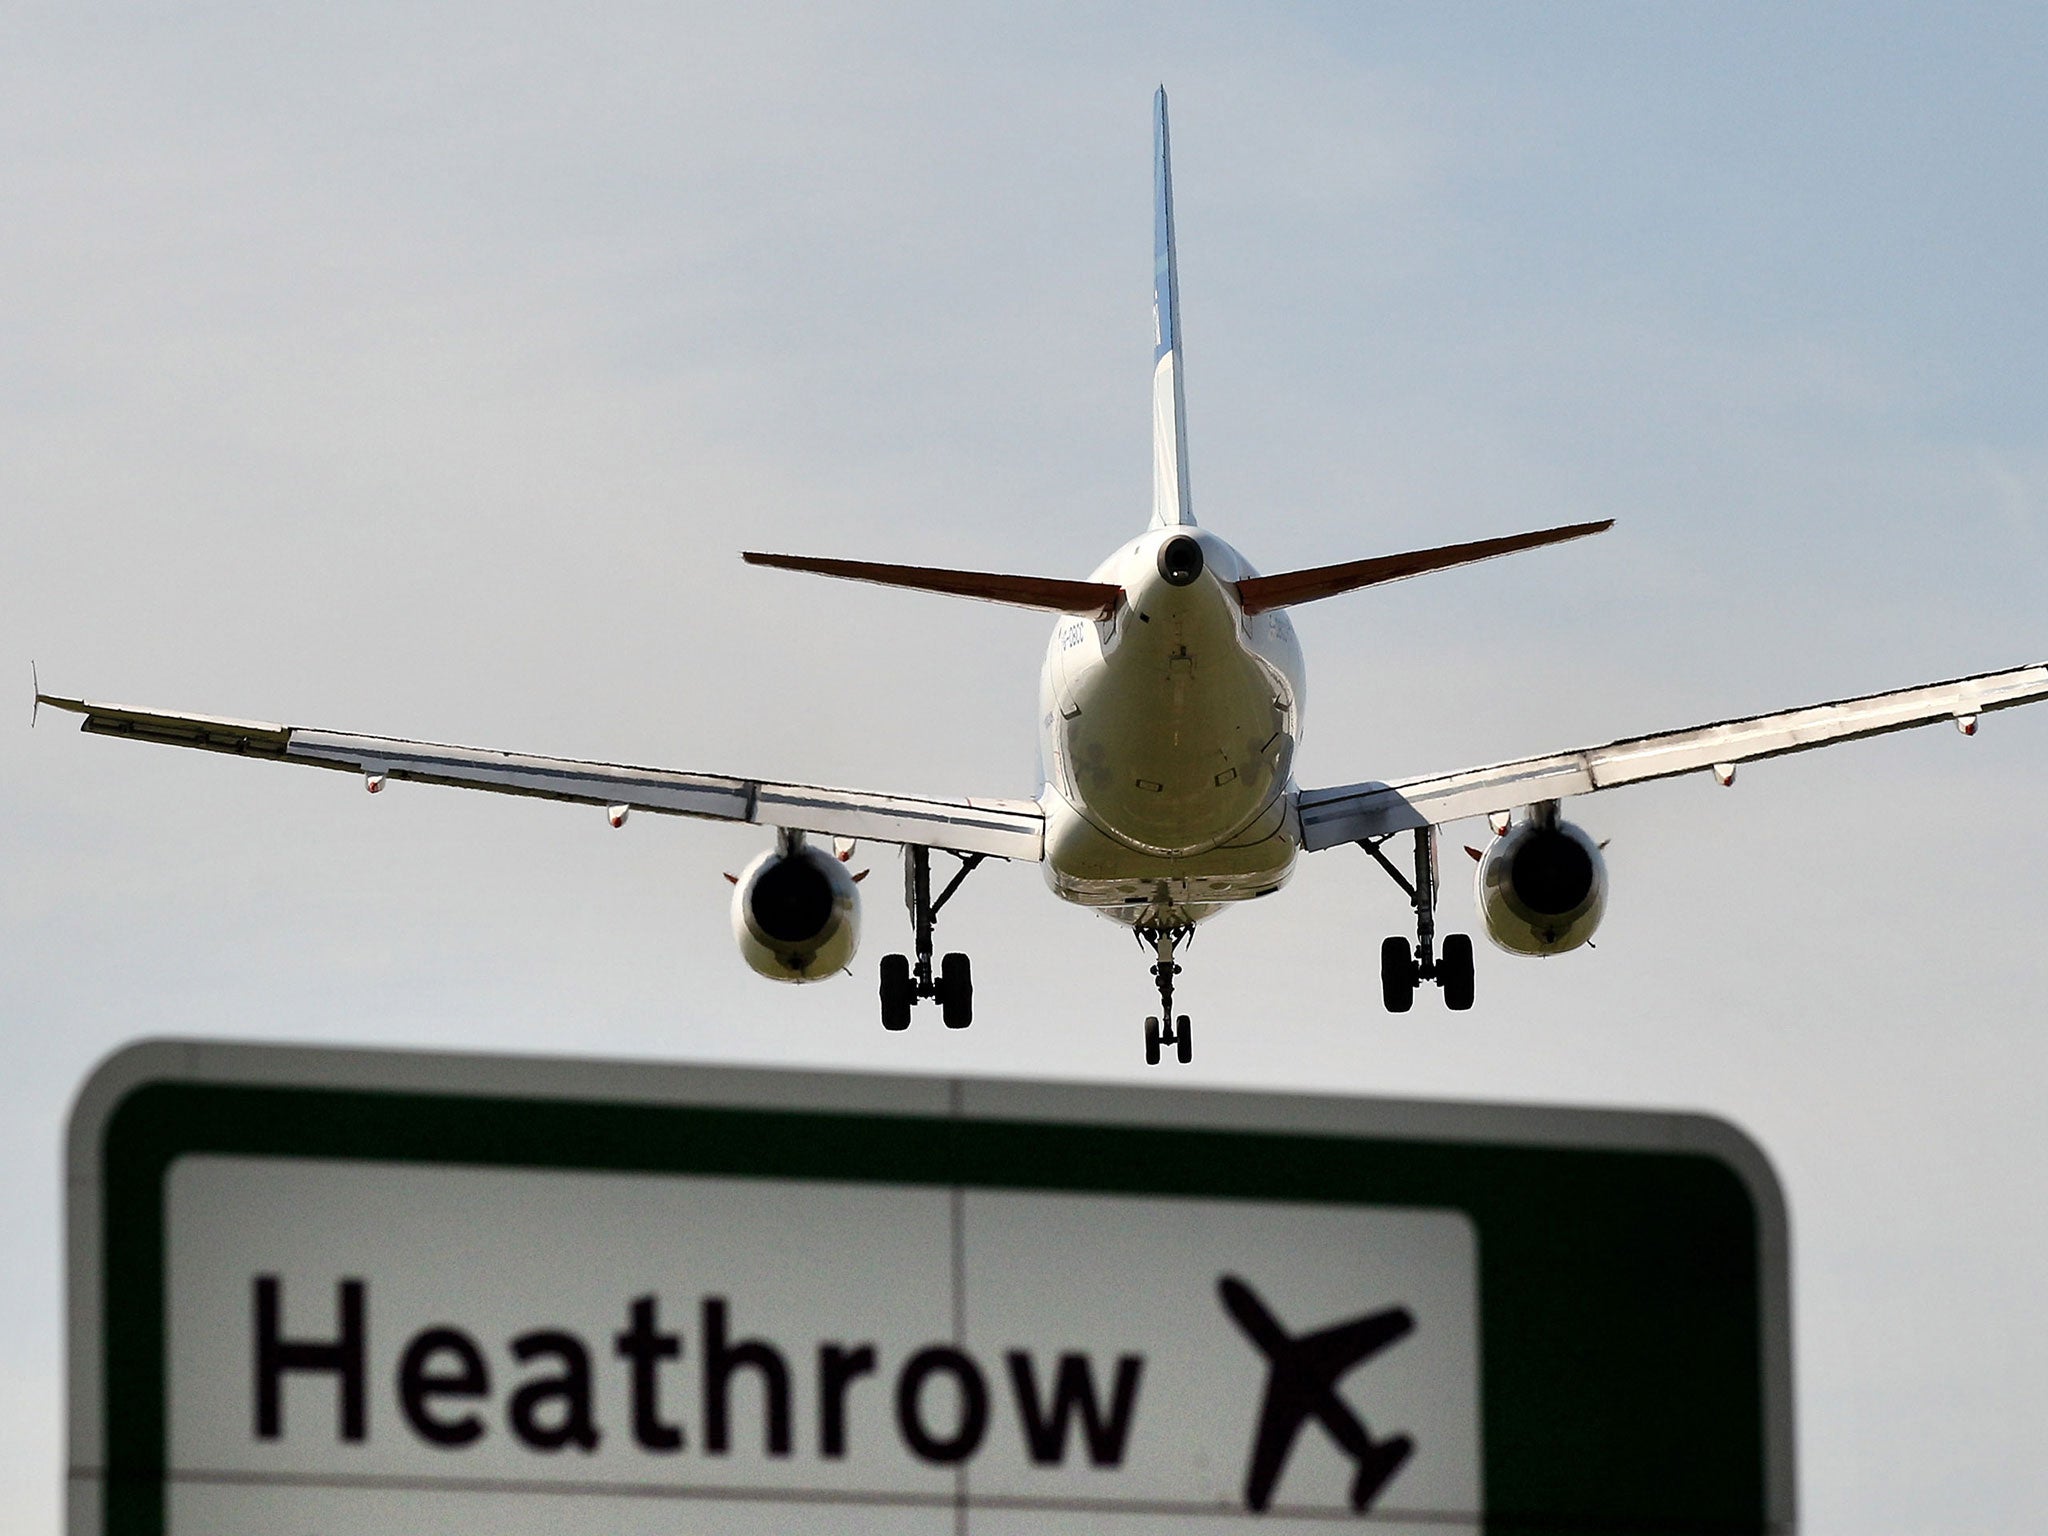 A survey by Which? found that some of the UK’s biggest airports, including Heathrow, left travellers the most agitated